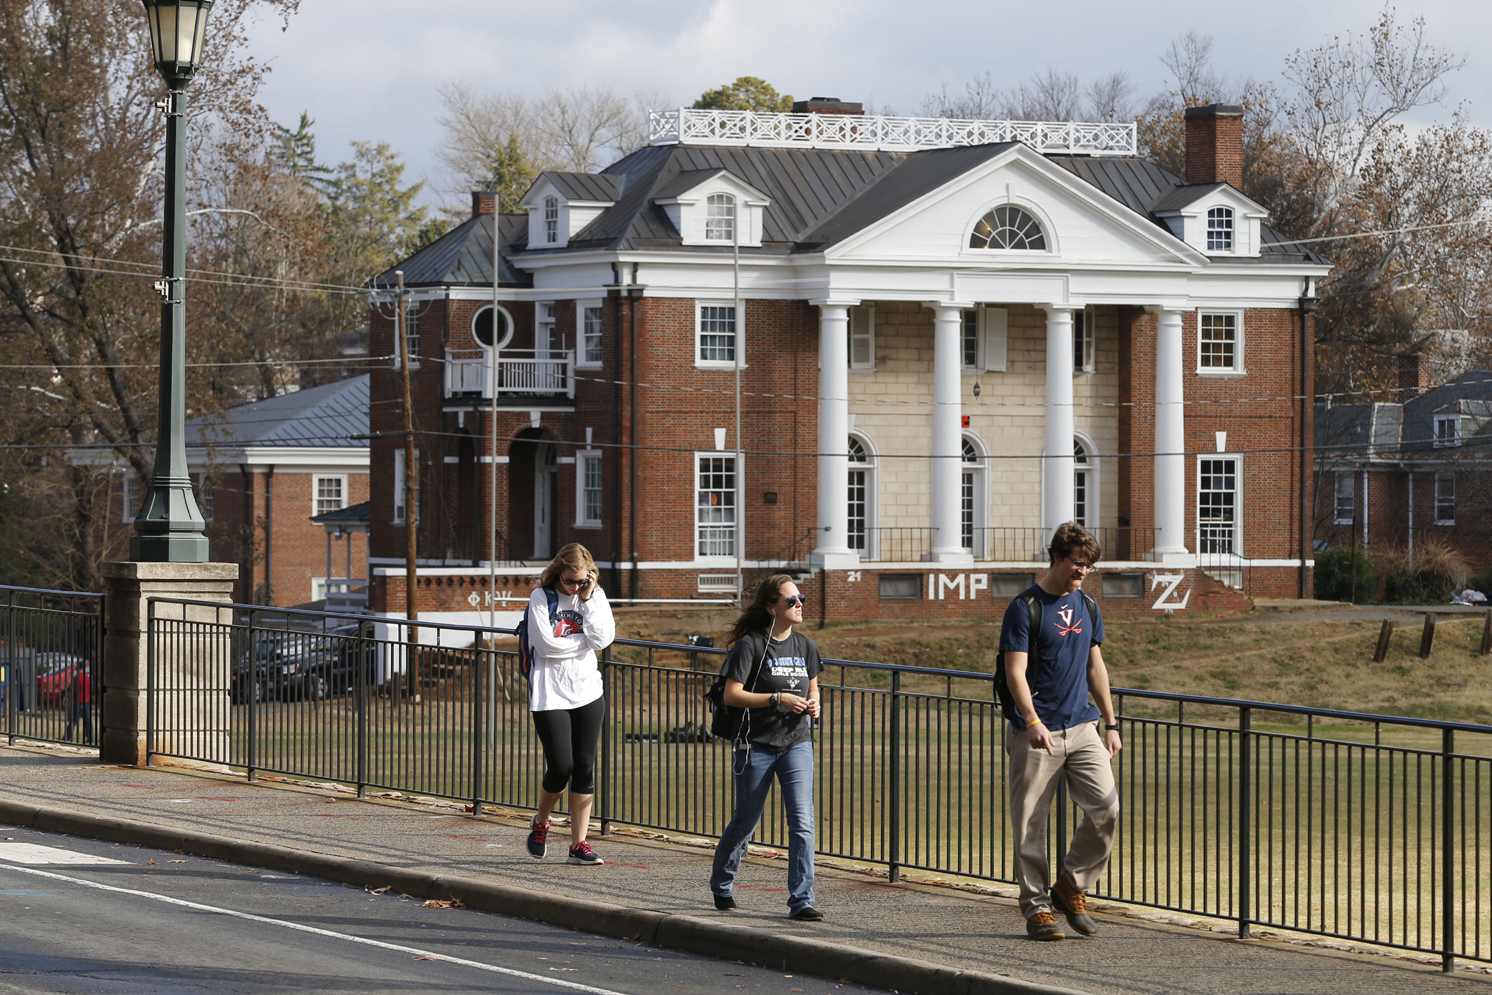 University of Virginia students walk to campus past the Phi Kappa Psi fraternity house where an alleged gang rape occurred. However, police said on Monday that they could not confirm that the rape happened.